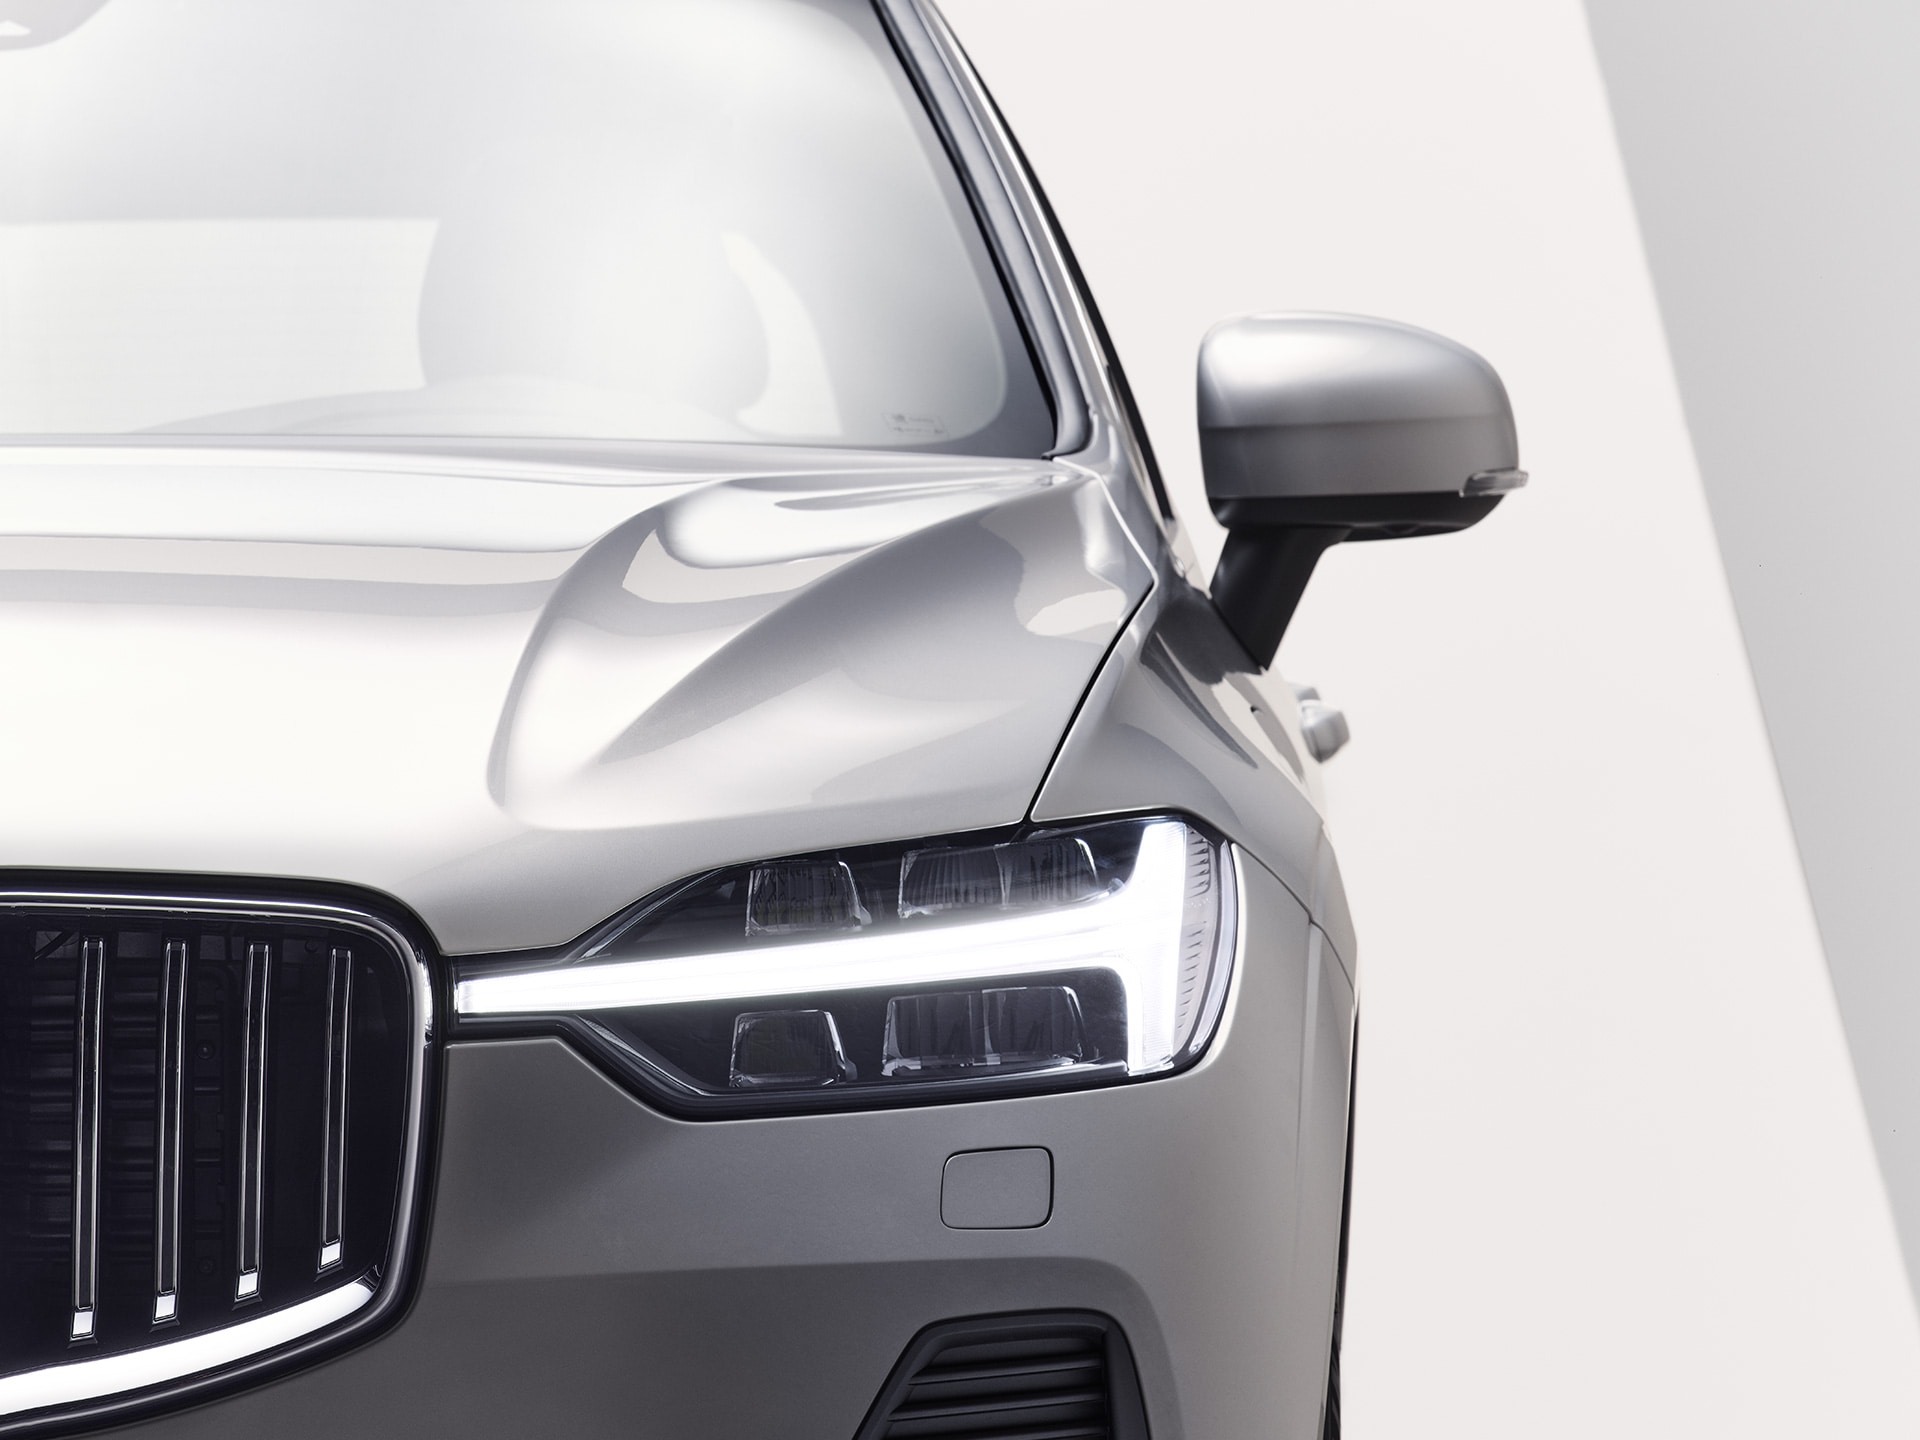 Front exterior of Volvo XC60 Recharge with the iconic front grille and headlamp design.